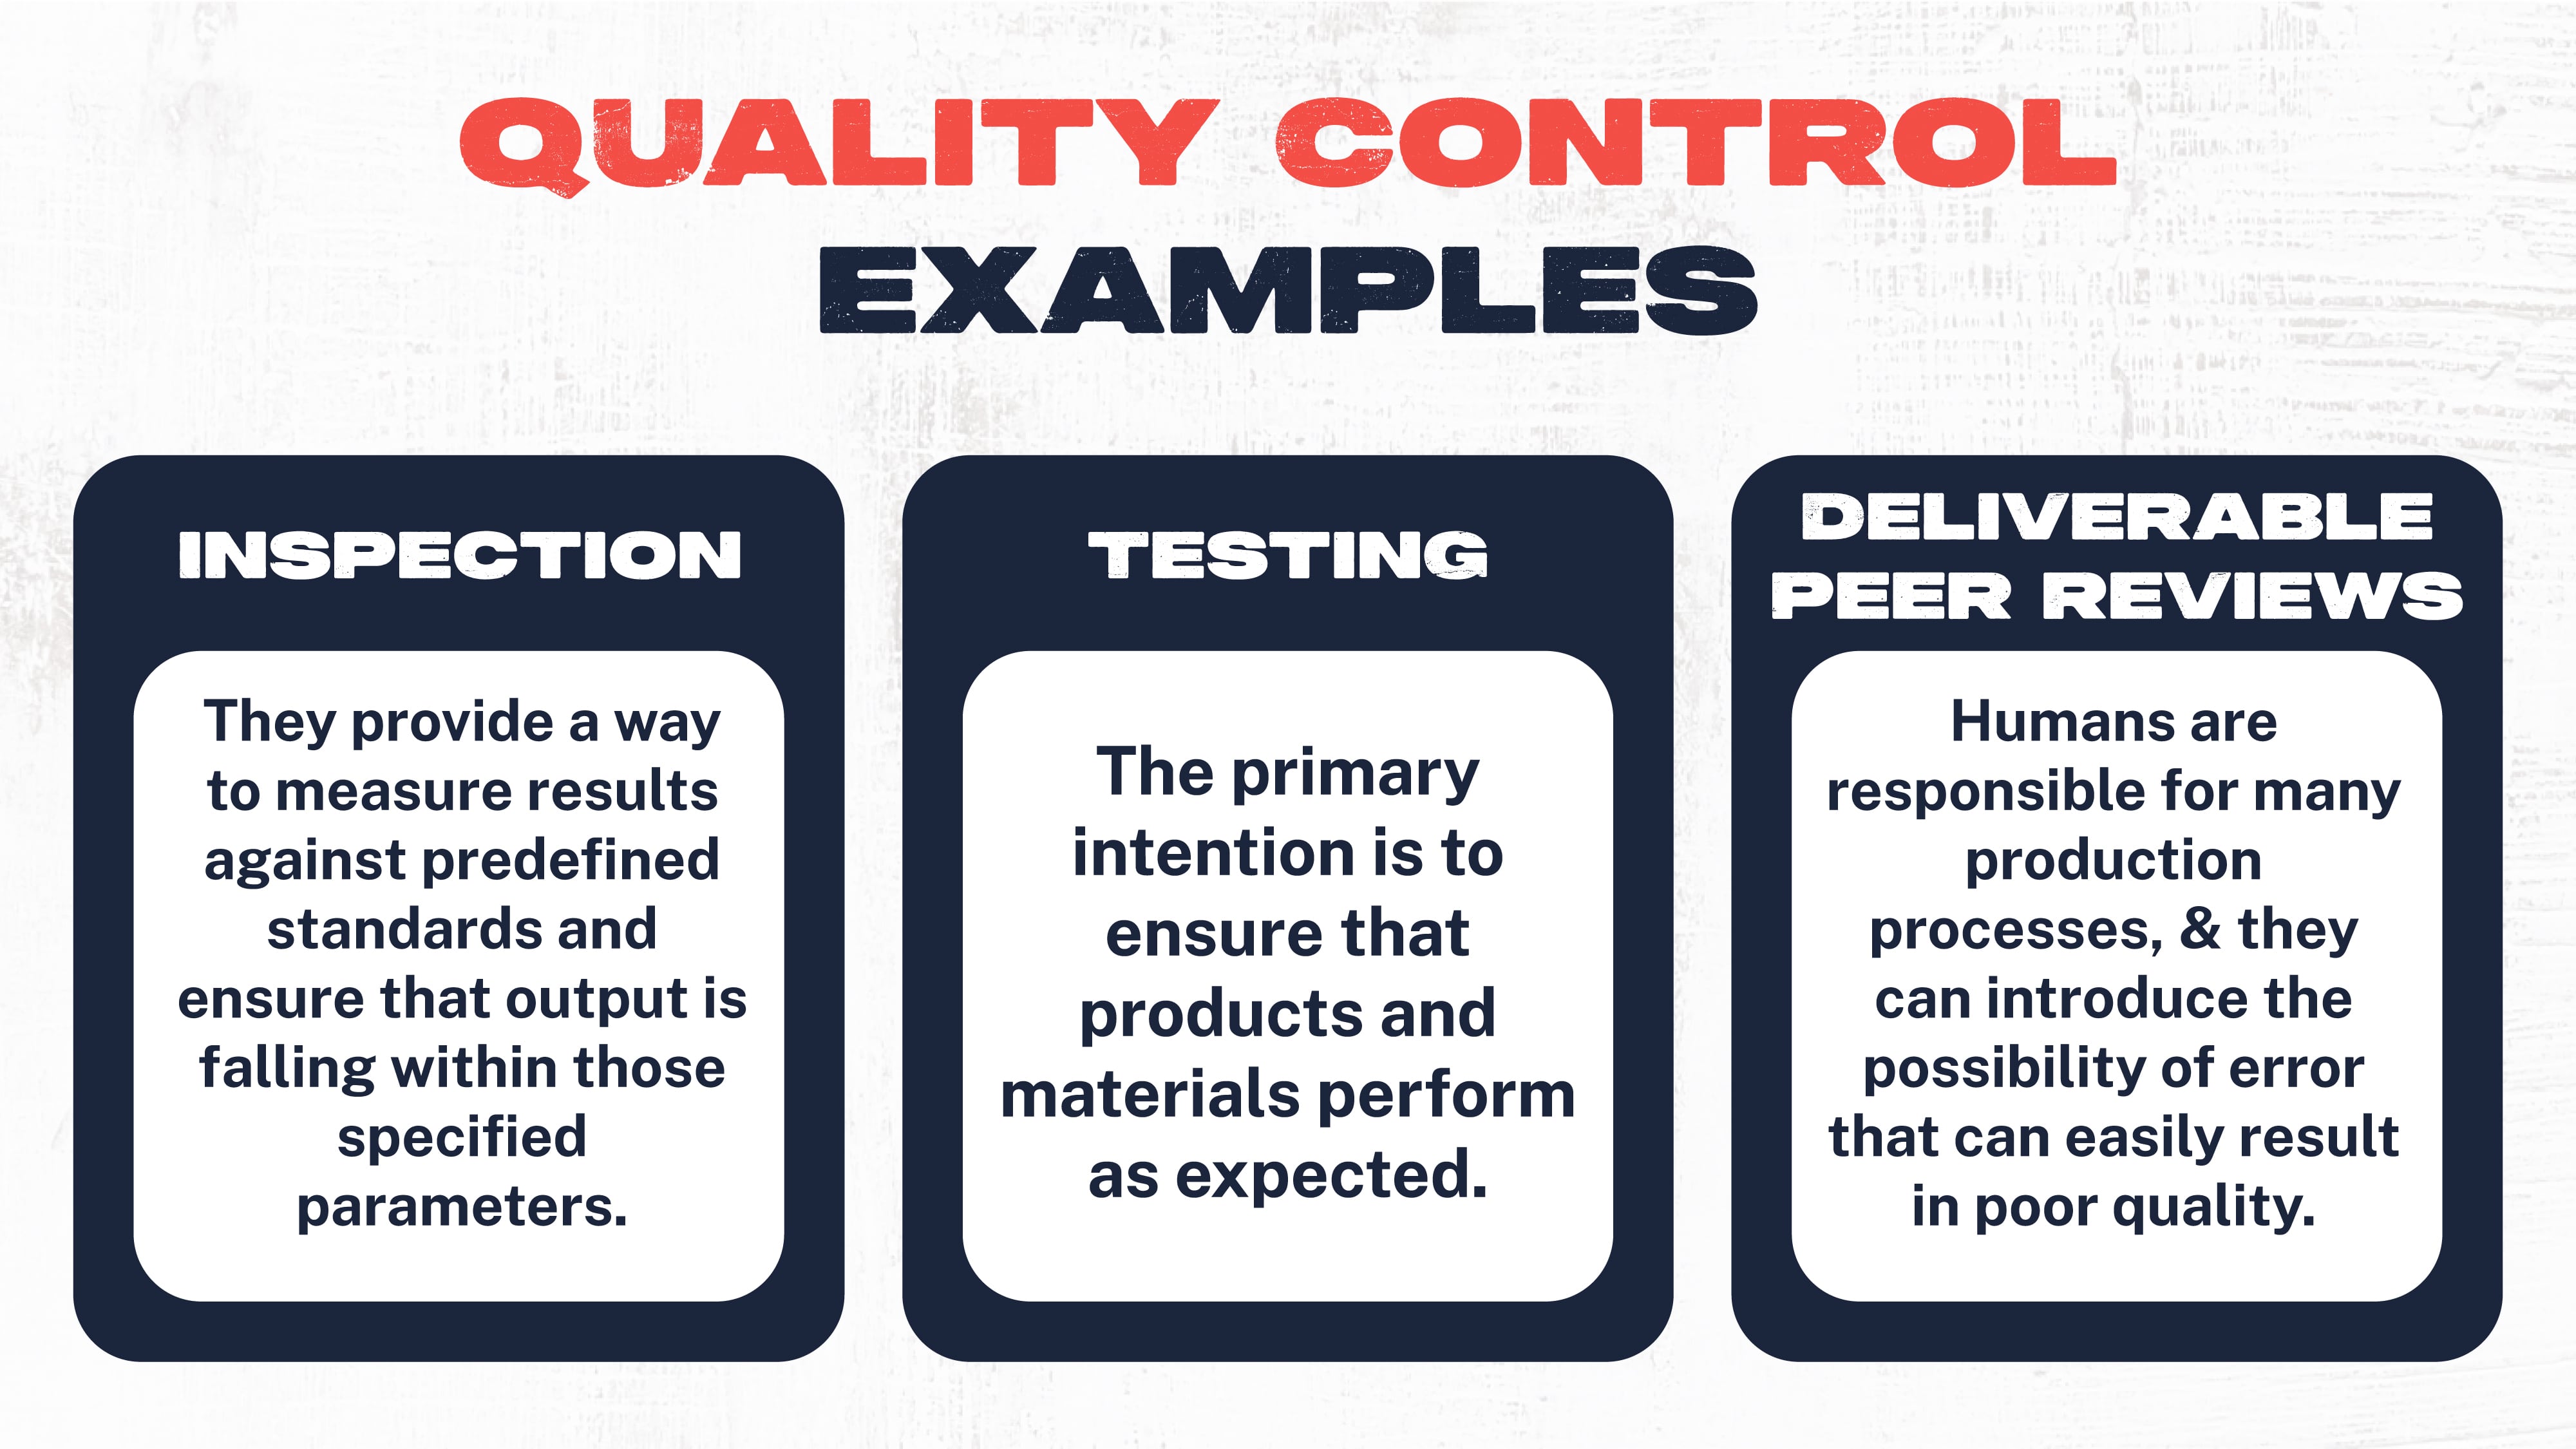 Quality Control Examples